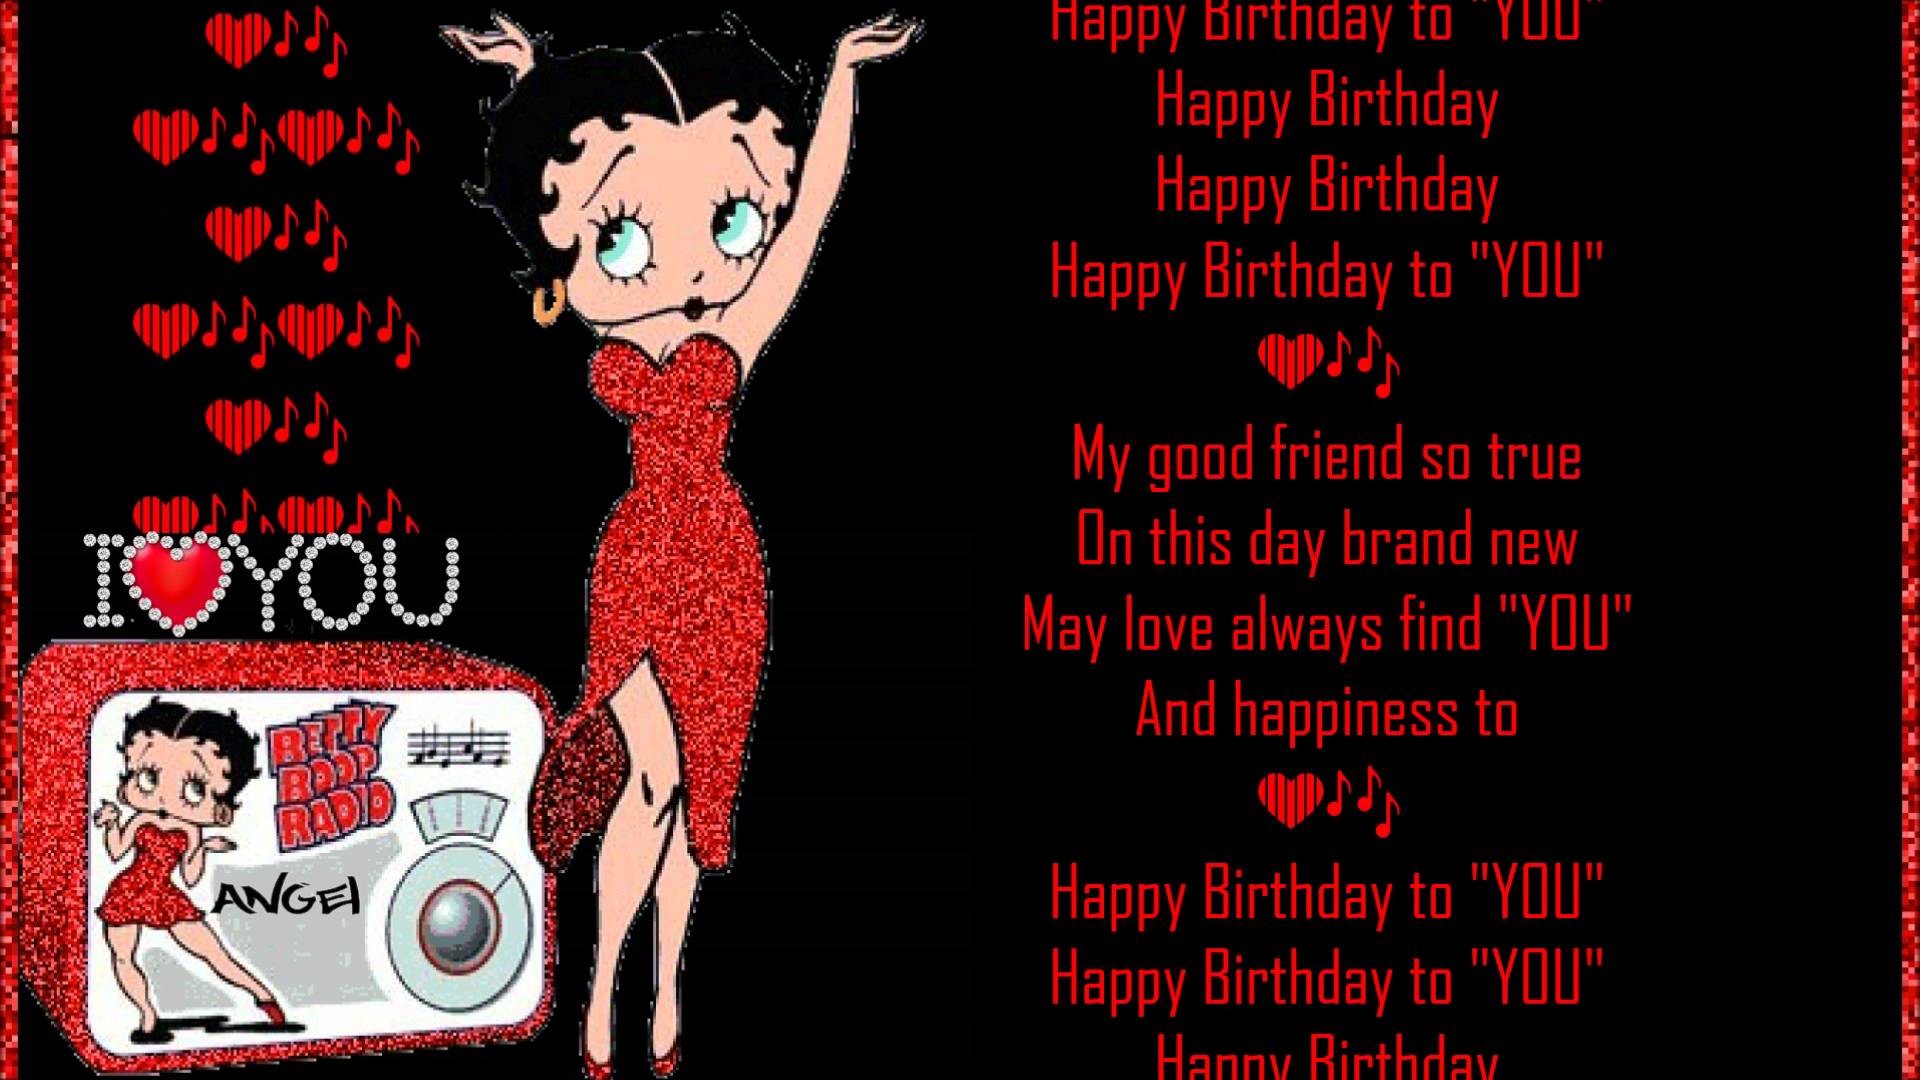 1920x1080 Betty boop birthday cards is amazing ideas which can be applied into your  birthday card 3